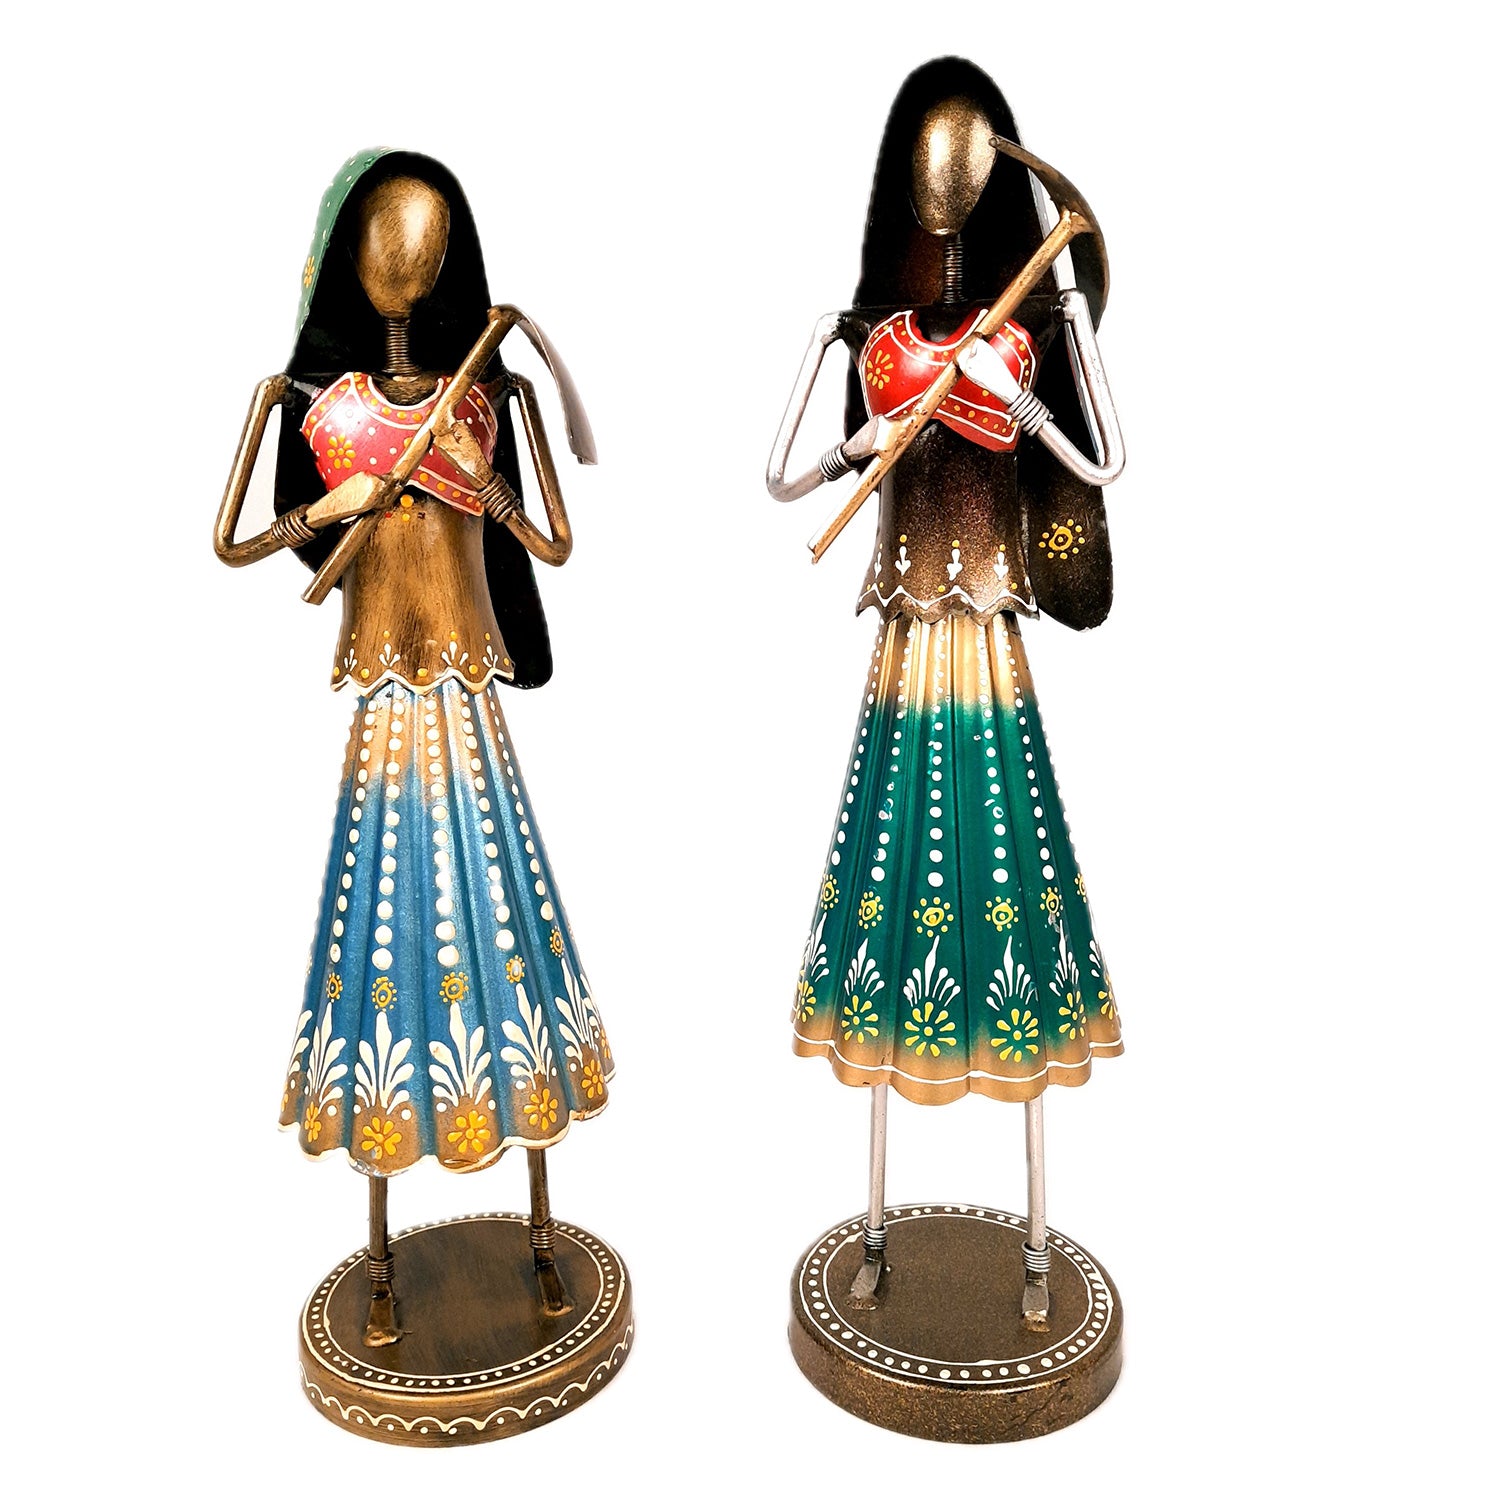 Showpiece Village Worker Ladies | Artifacts for Home, Table, Living Room, TV Unit & Bedroom Decor | Decorative Show piece for Office Desk & Gifts - 15 Inch (Set of 2) - Apkamart